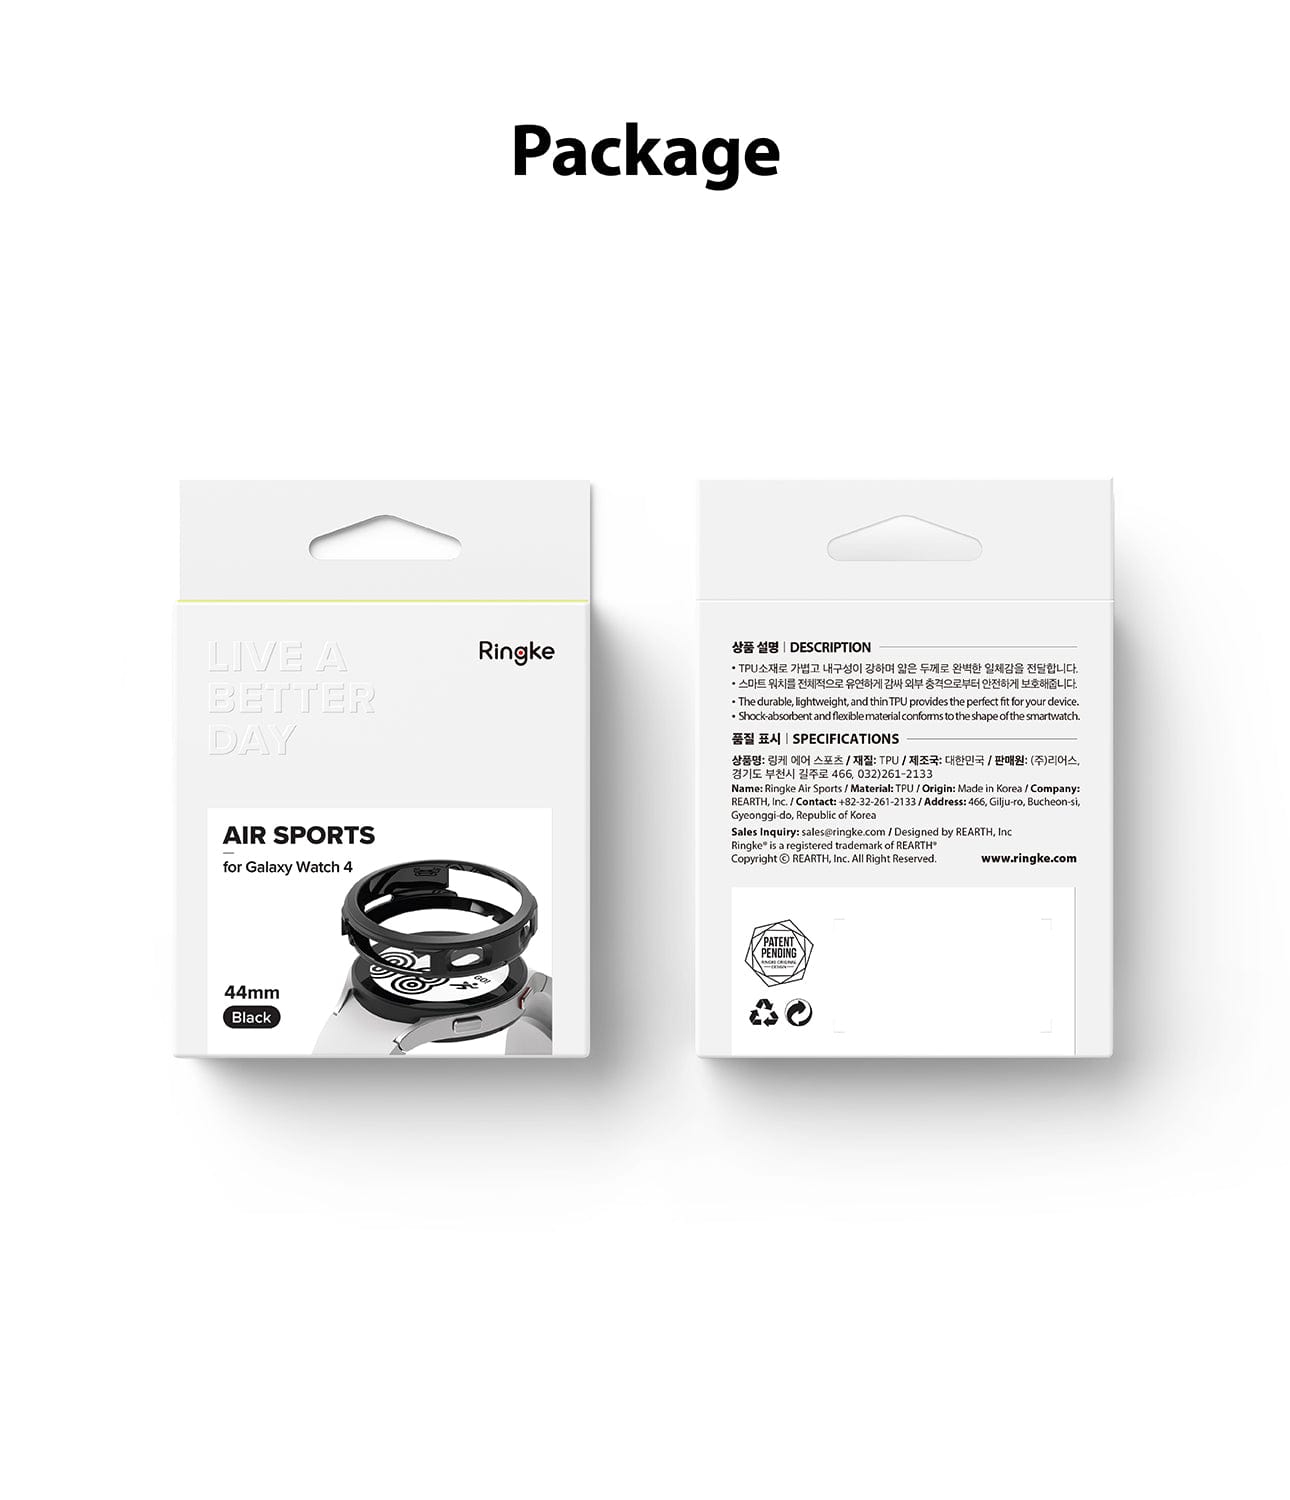 Yes, the Ringke Air Sports case for Galaxy Watch 4 comes in a retail package, ensuring its authenticity and quality presentation.